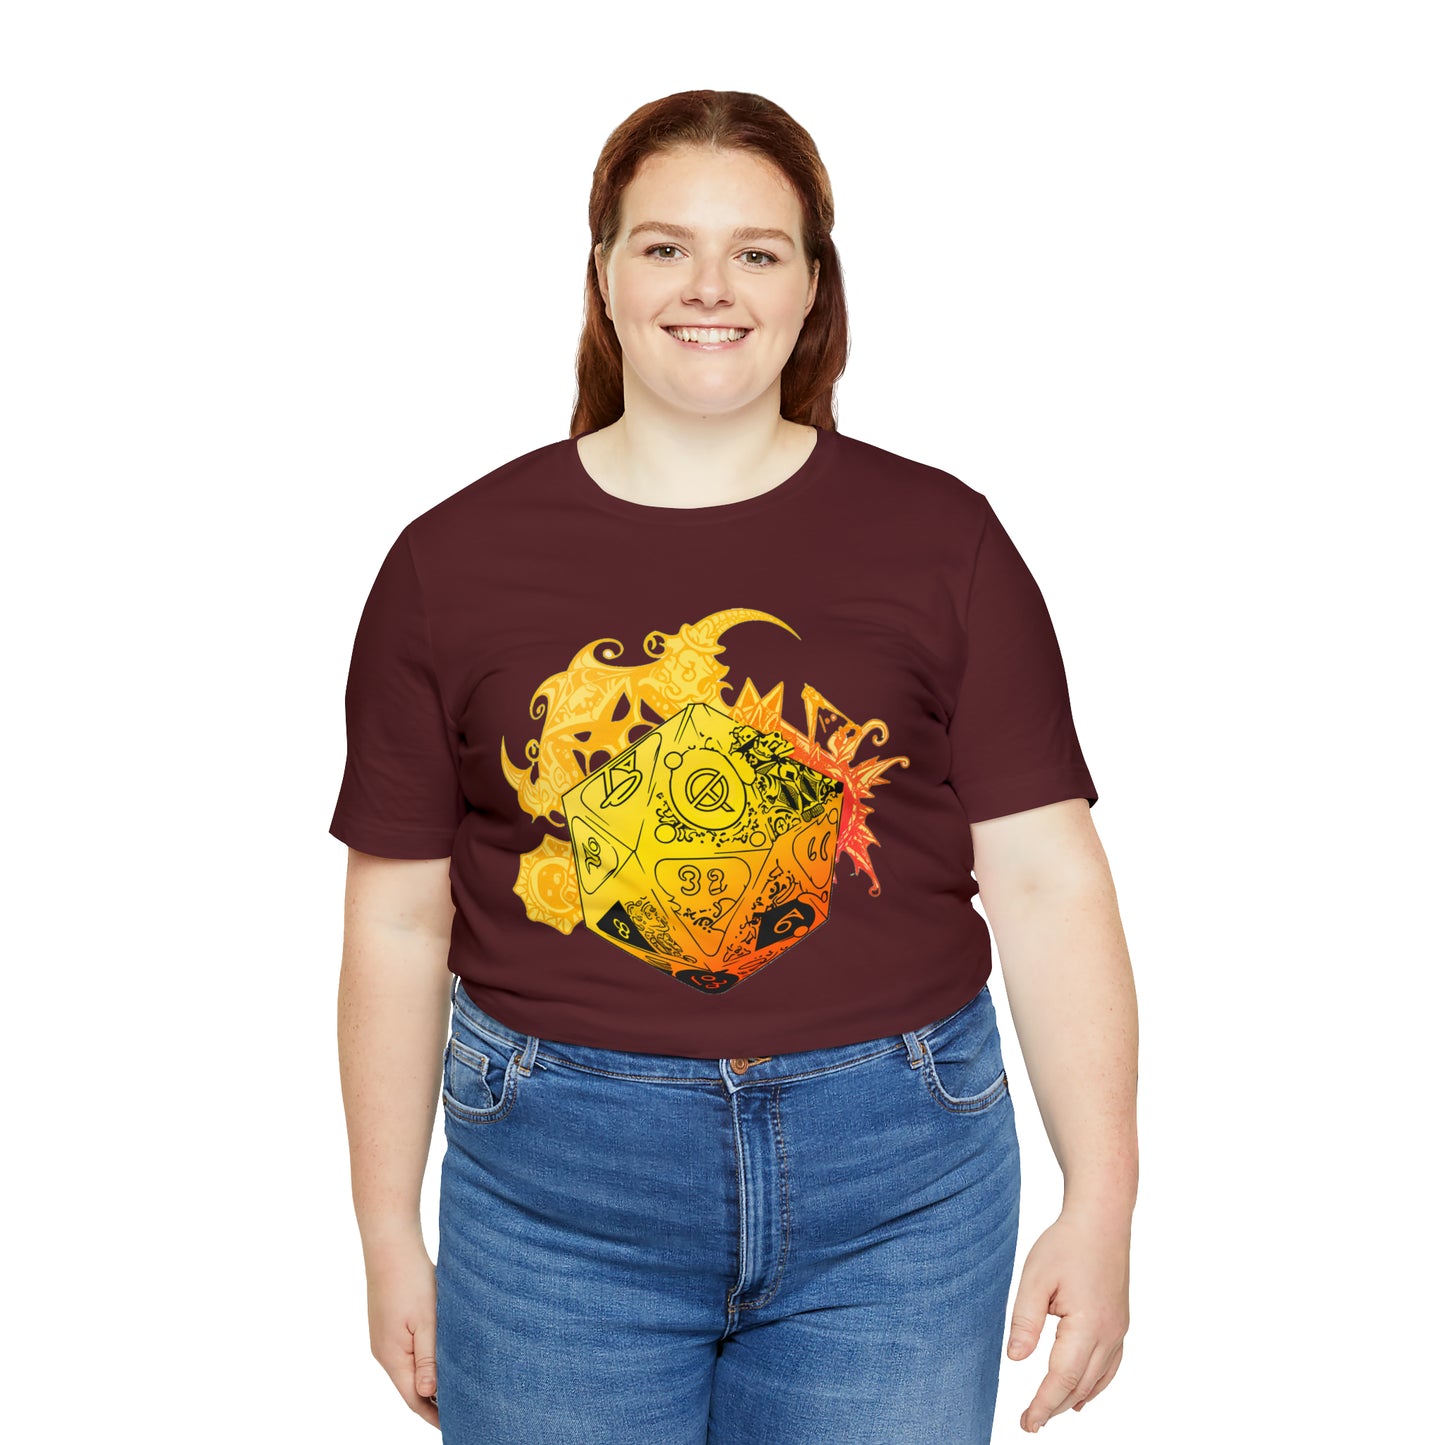 maroon-quest-thread-tee-shirt-with-large-yellow-dragon-dice-on-center-of-shirt